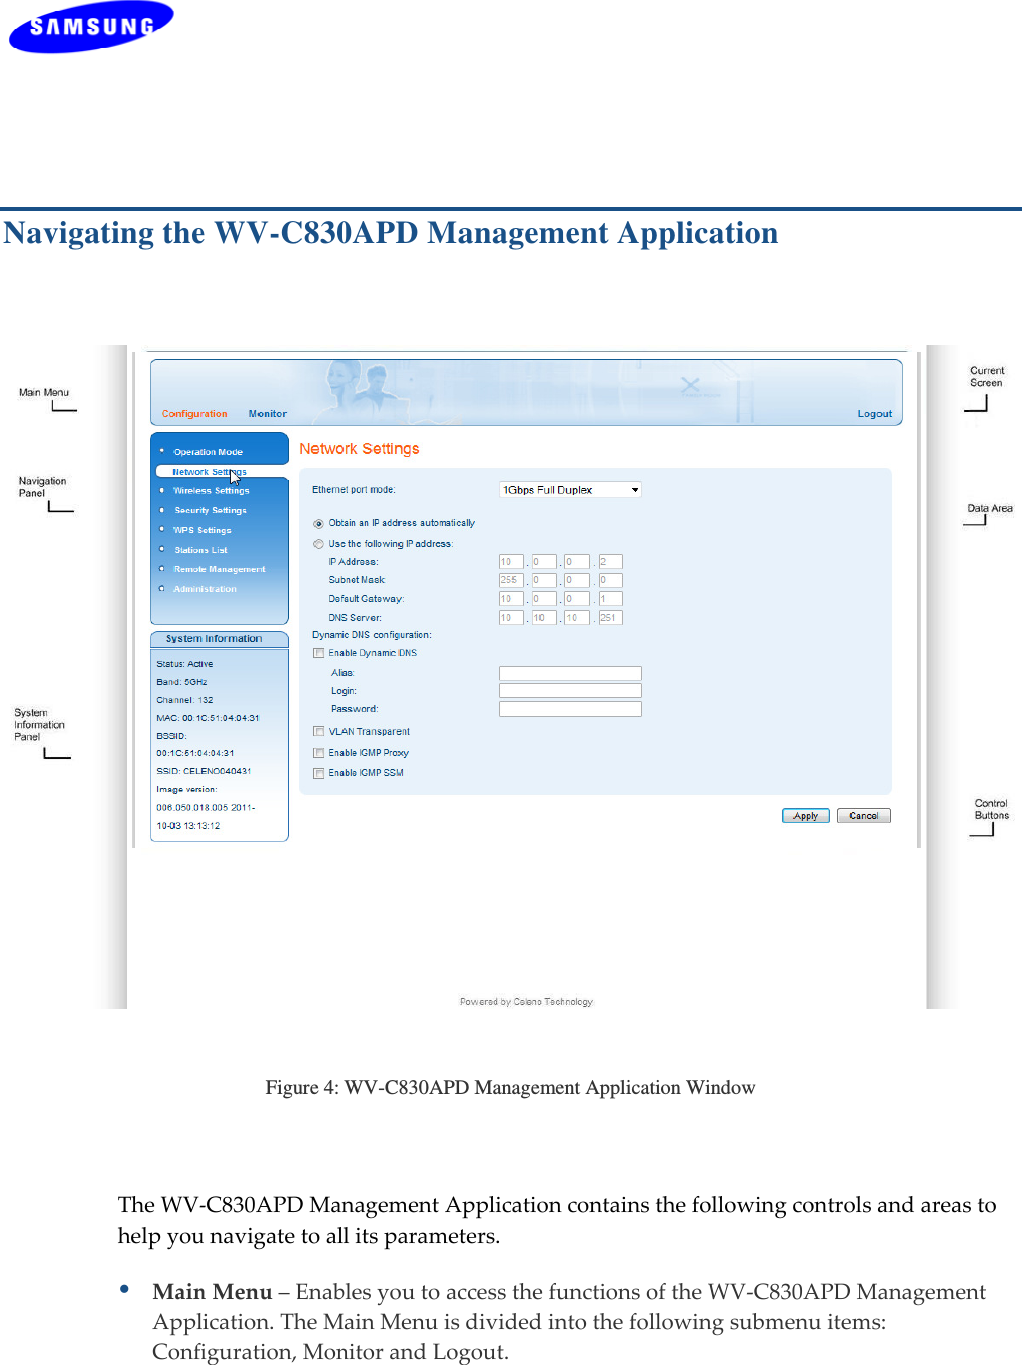   Copyright © 2012  Celeno Communications™ - All Rights Reserved    |    www.celeno.com                                                  pg. 19 Navigating the WV-C830APD Management Application Figure 4: WV-C830APD Management Application Window TheWV‐C830APDManagementApplicationcontainsthefollowingcontrolsandareastohelpyounavigatetoallitsparameters.MainMenu–EnablesyoutoaccessthefunctionsoftheWV‐C830APDManagementApplication.TheMainMenuisdividedintothefollowingsubmenuitems:Configuration,MonitorandLogout.